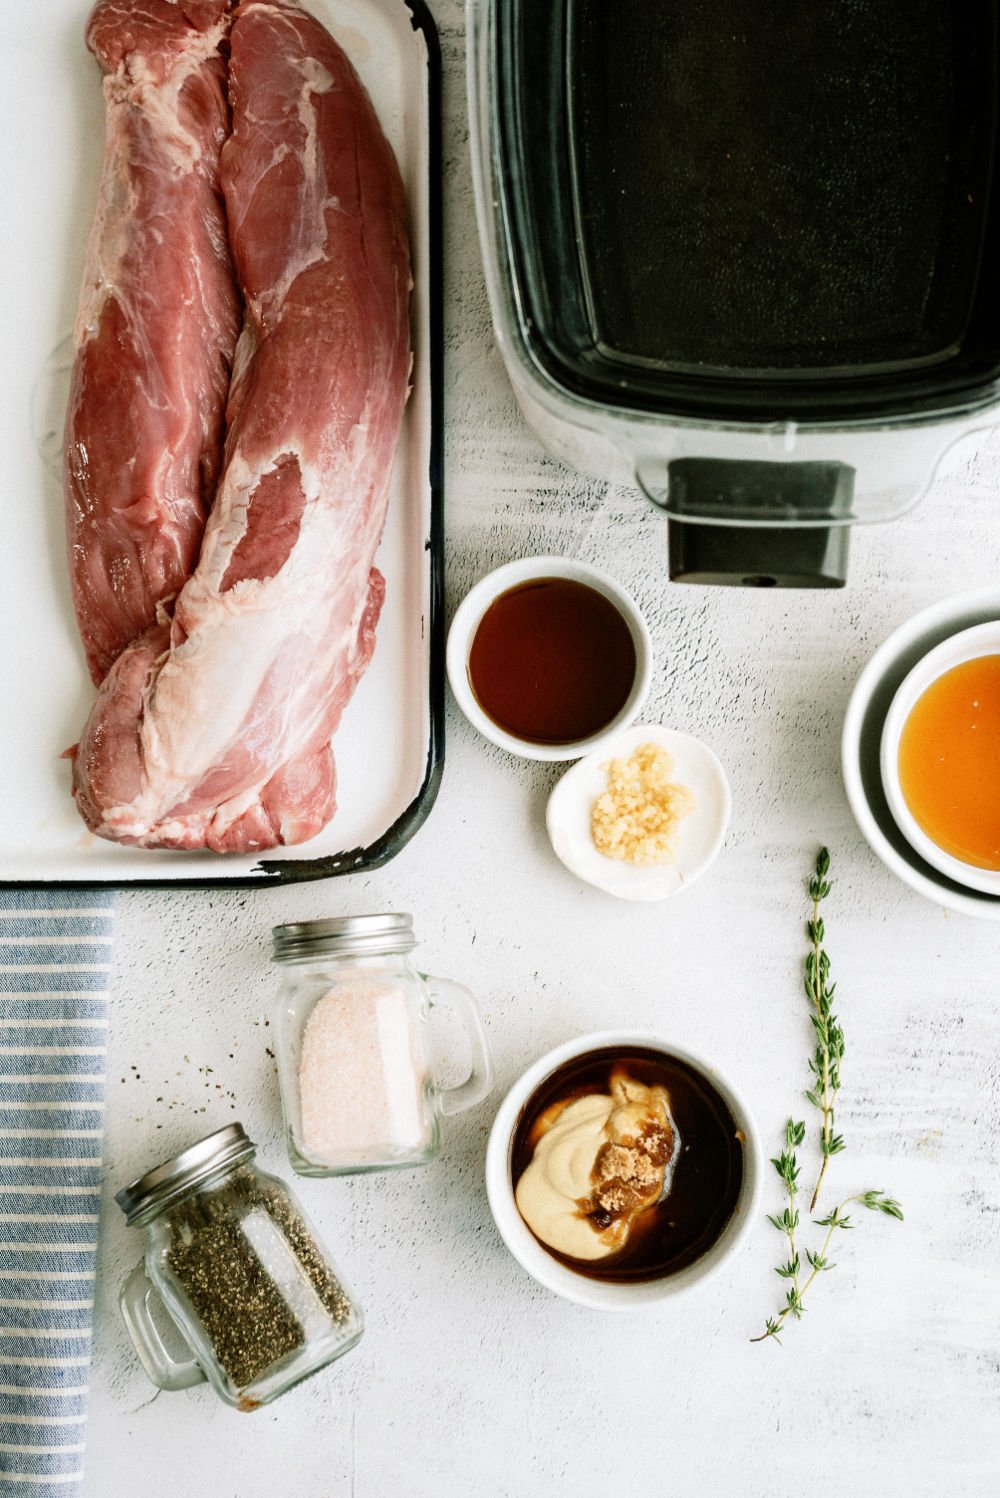 Ingredients for Instant Pot Maple and Brown Sugar Pork